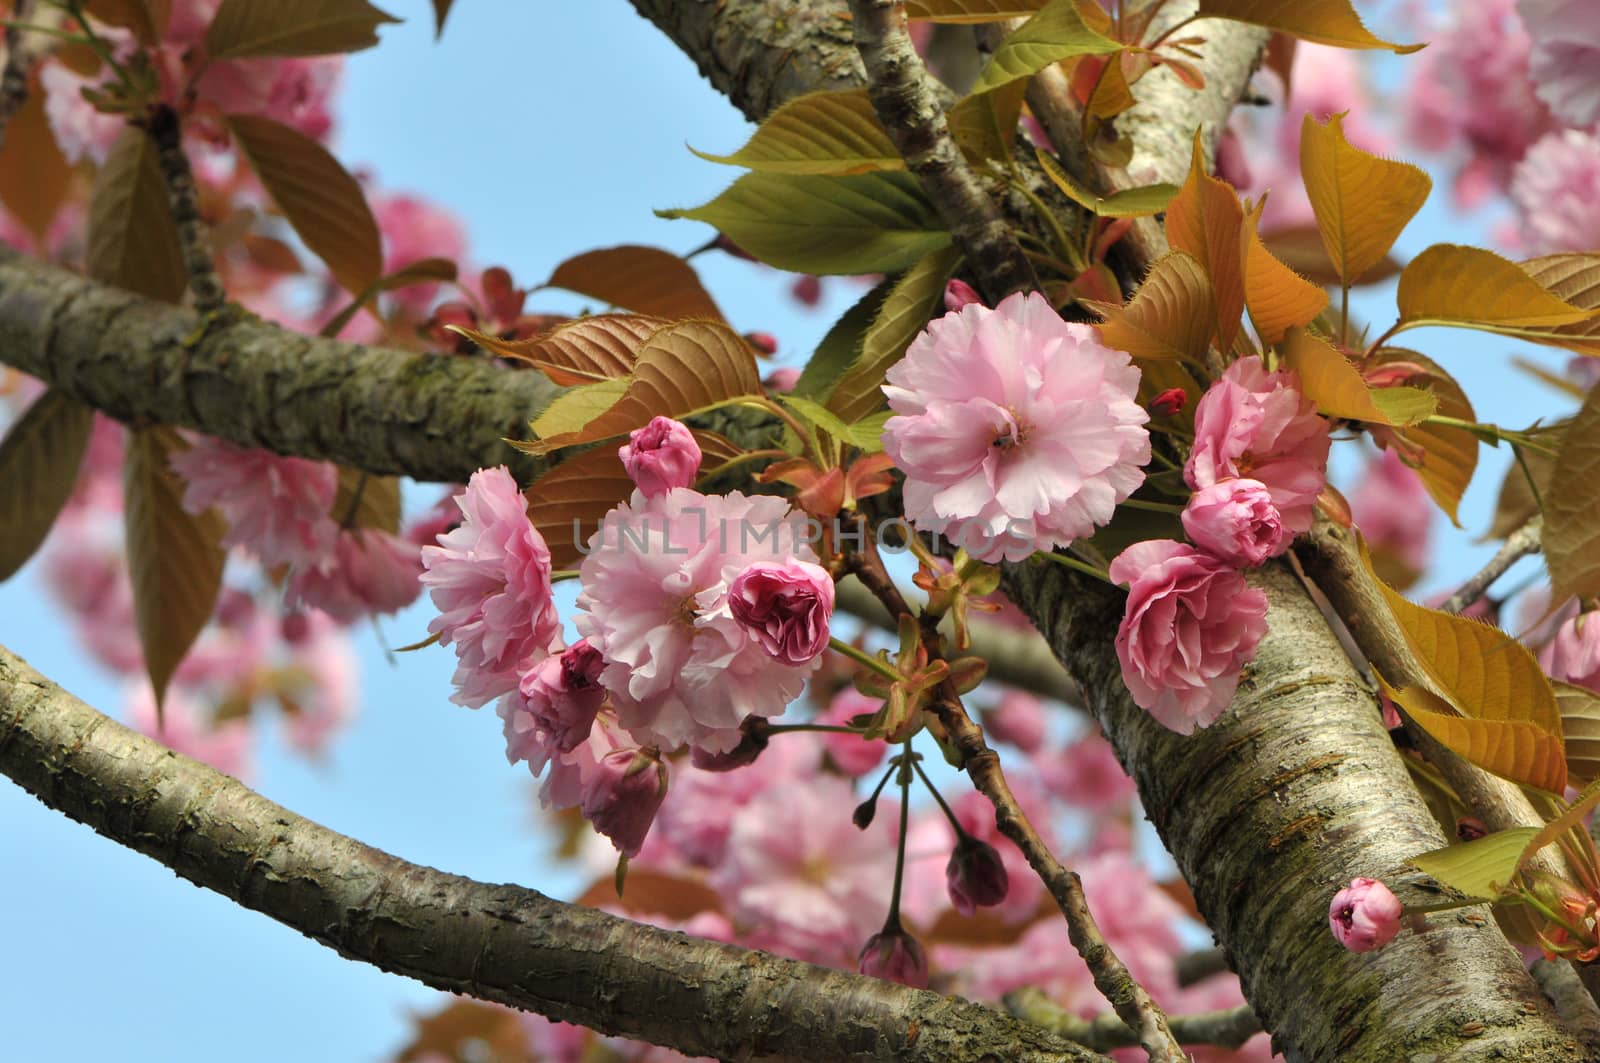 Pink Cherry Blossom along Branchs with a Blue Sky